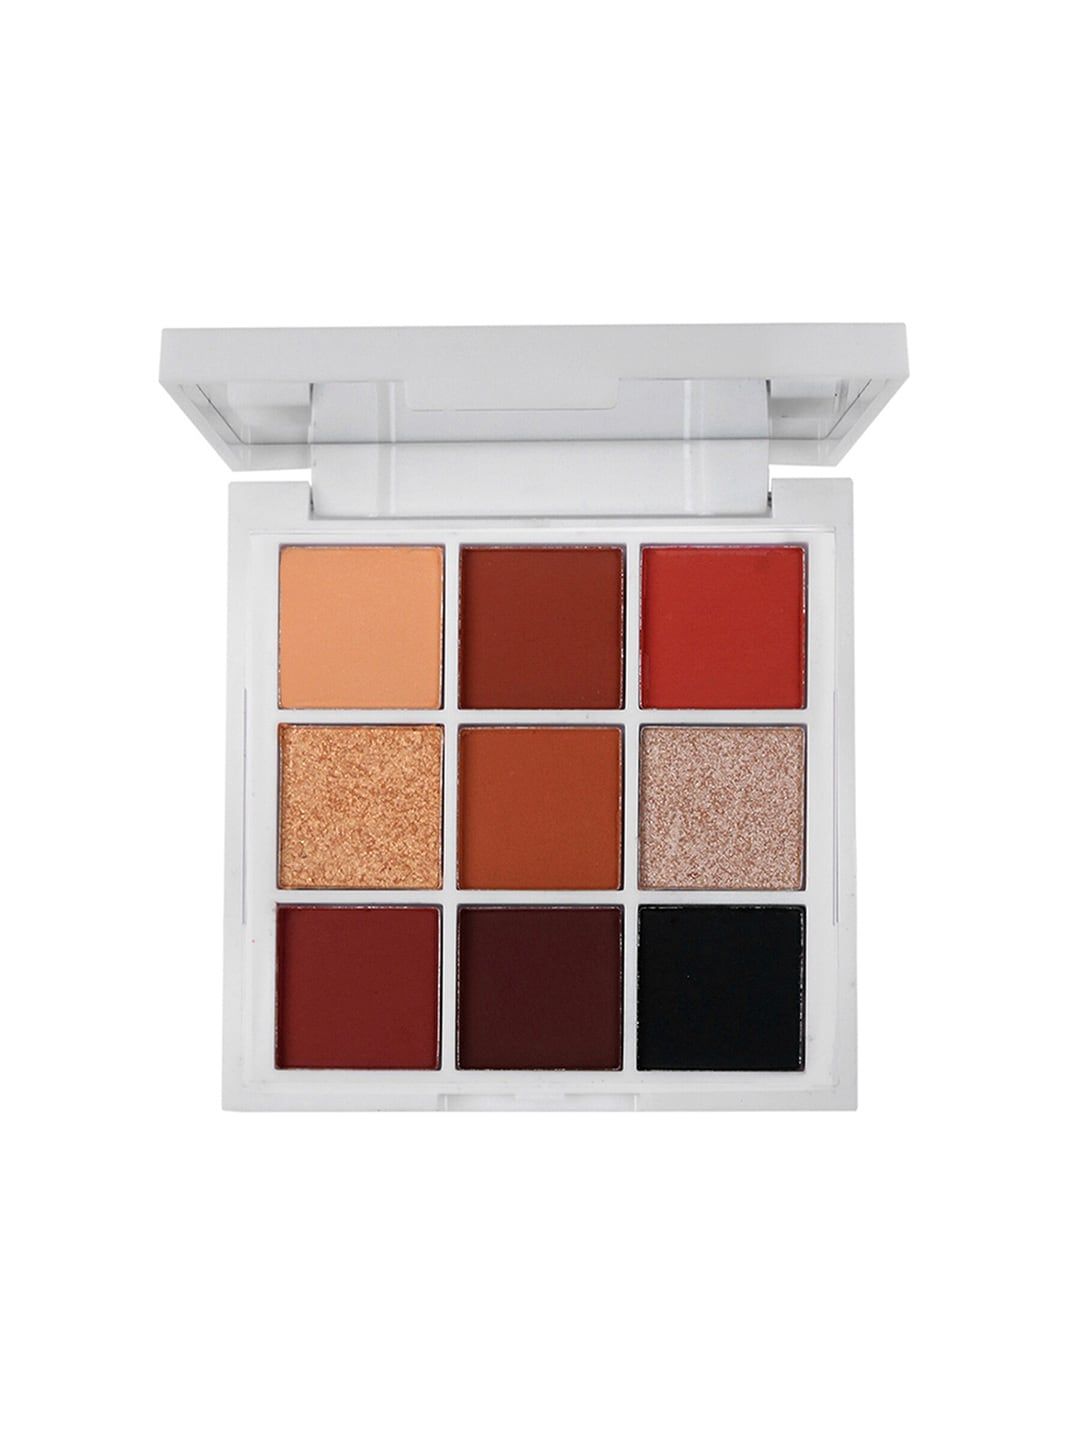 MARS I Belong In Your Purse Eyeshadow Palette - Smoke It Up Price in India